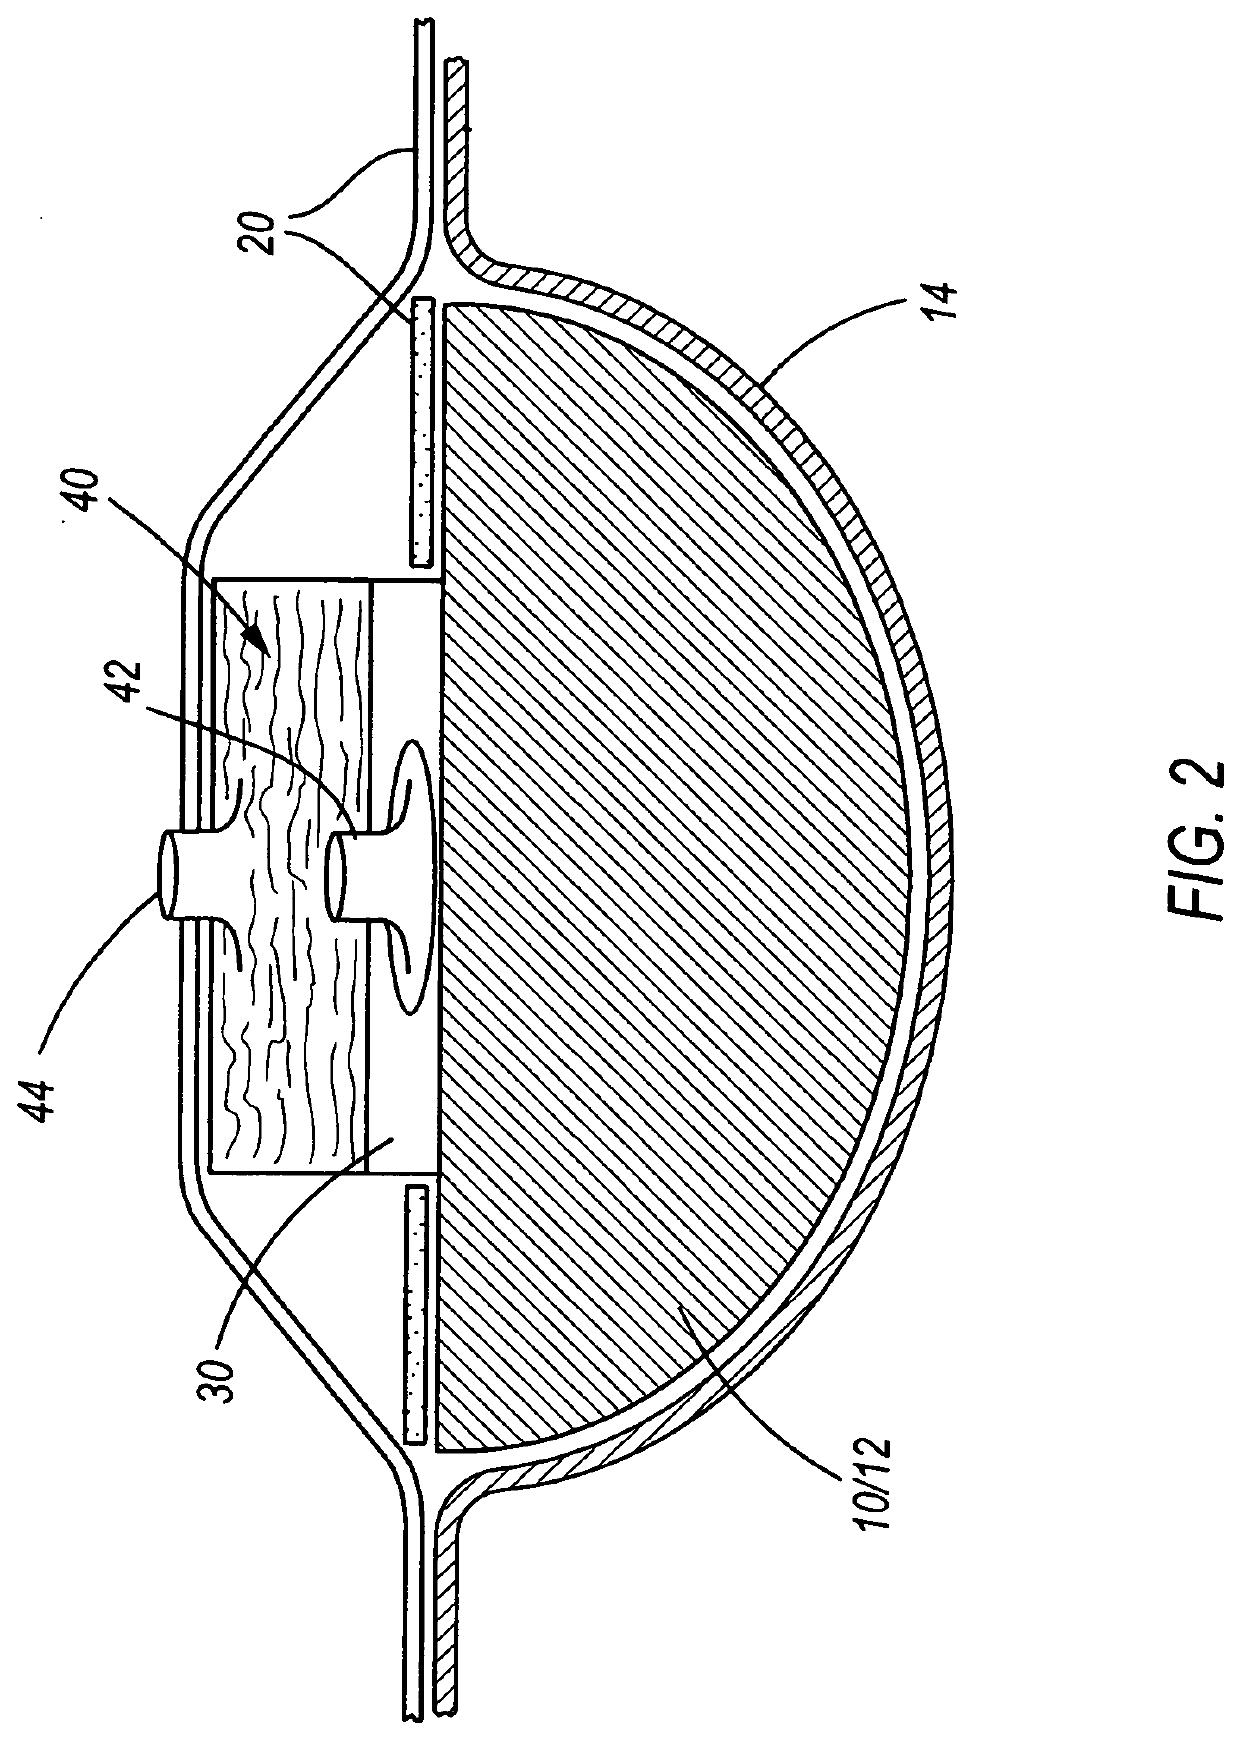 Wound Dressing containing a vacuum pump